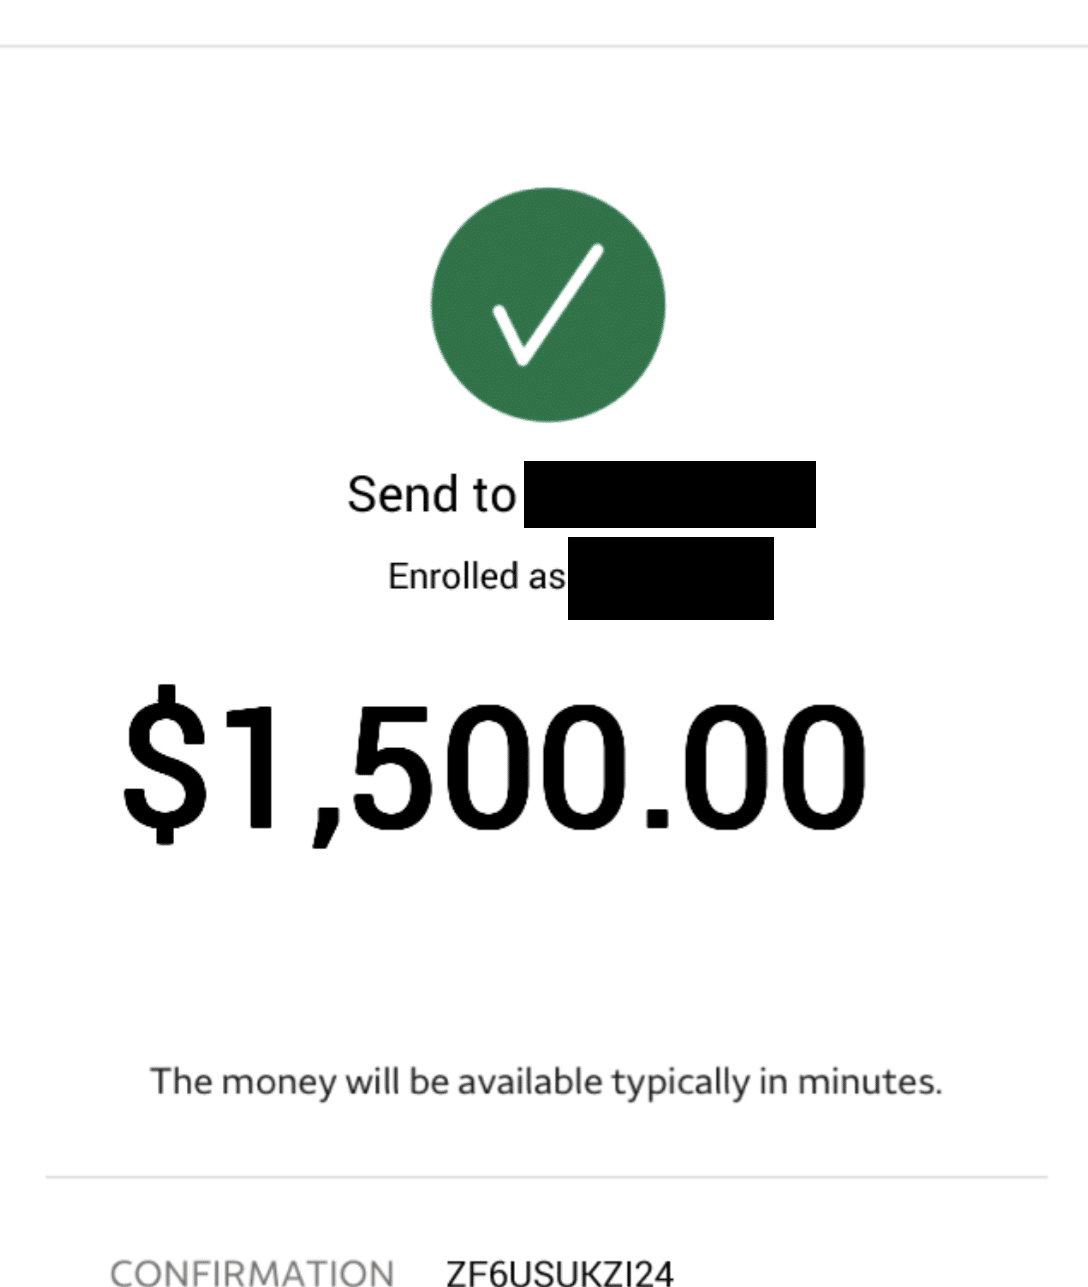 "Sending" $1500 to the email provided by the job scam.